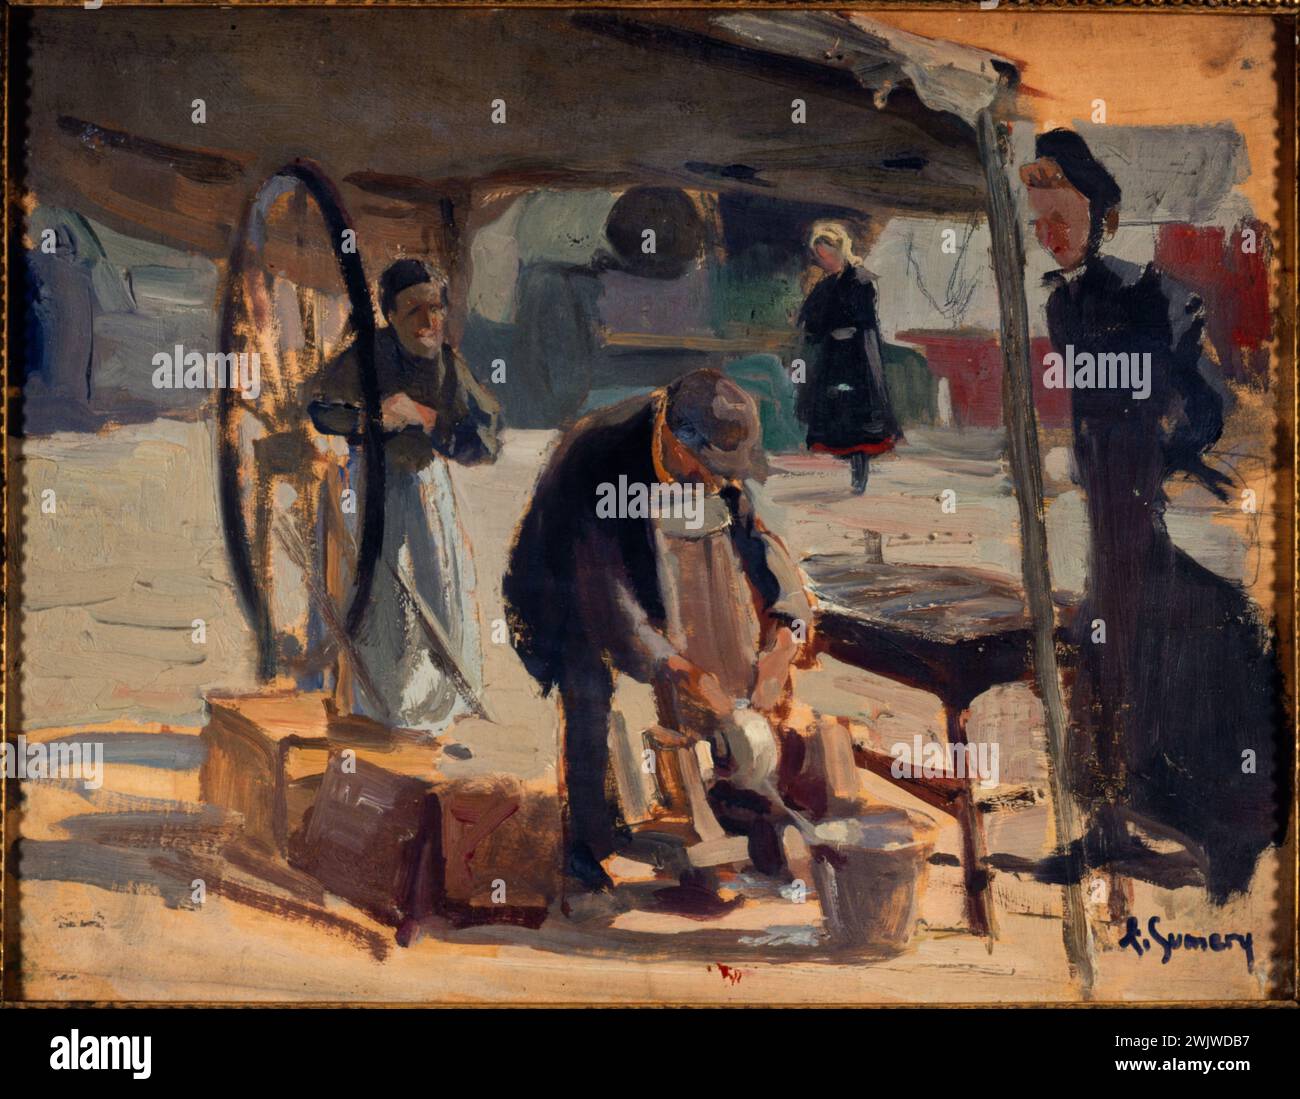 Adolphe-Ernest GUMERY (1861-1943). Remouleur in Passy. Oil on wood. 1890. Paris, Carnavalet museum. 76086-29 Sharp, Wood oil, ity stall, Passy, Petit Metier, Remouleur, 16th 16th 16th 16 16th 16th arrondissement Stock Photo